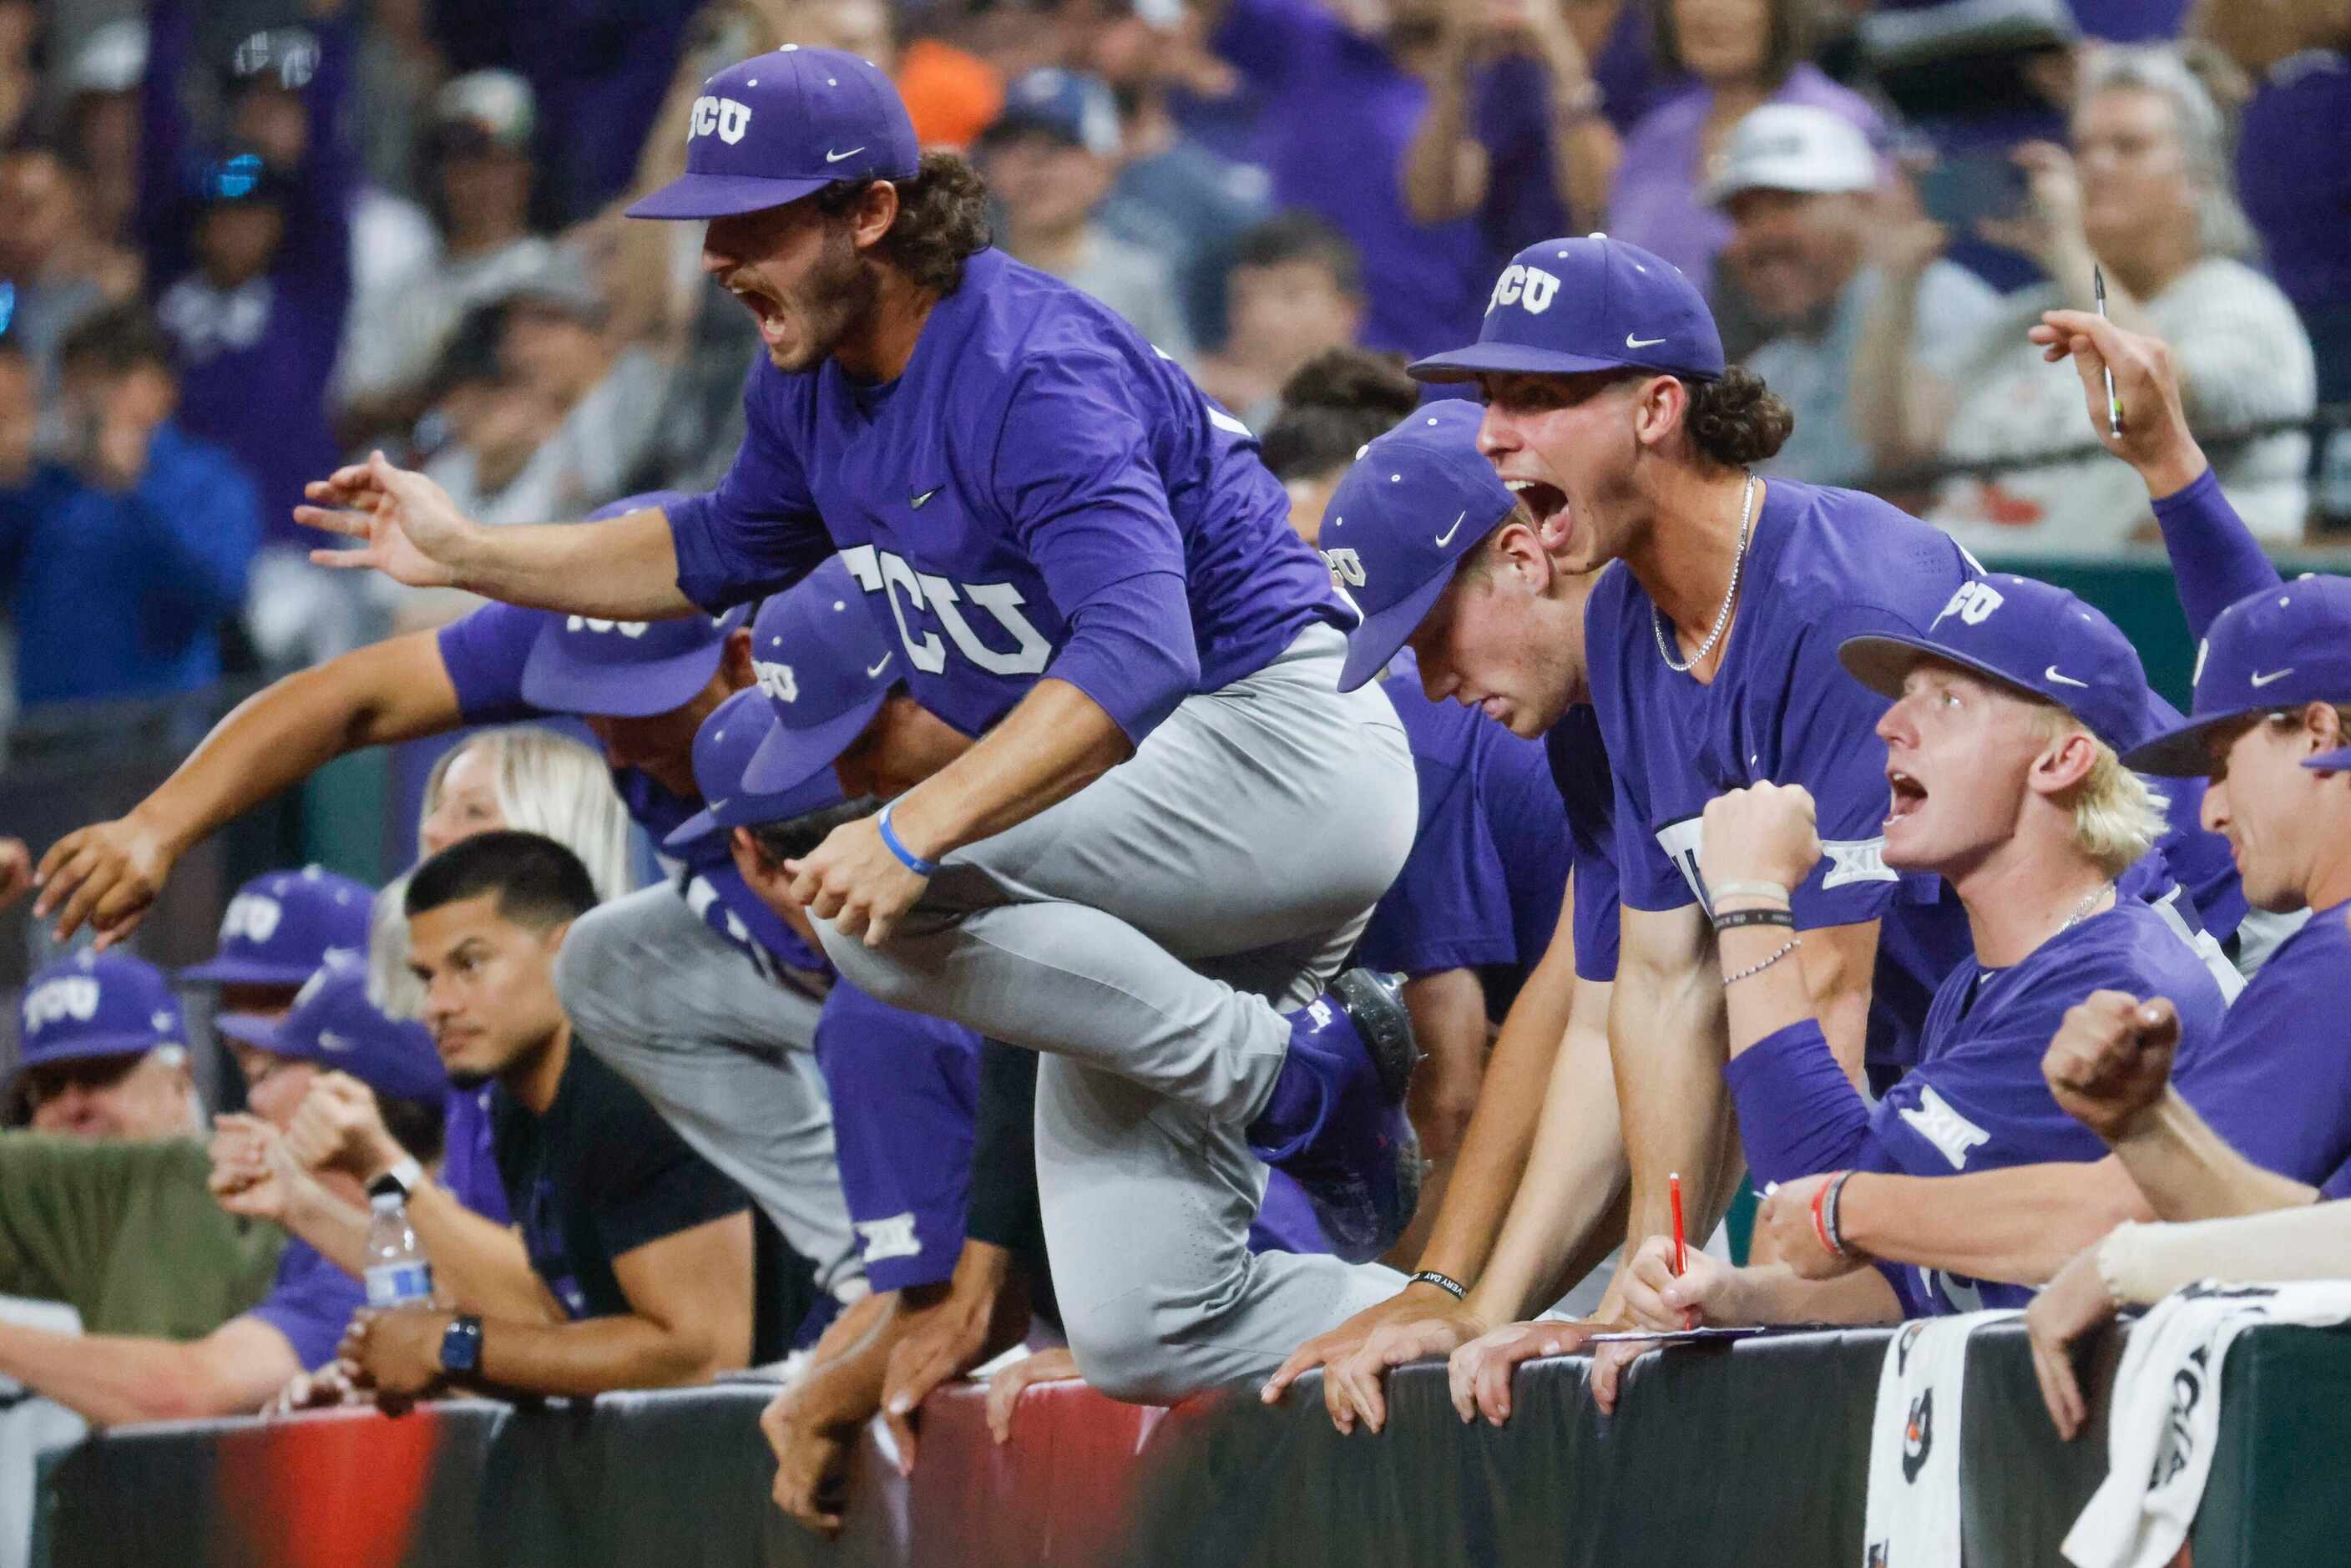 TCU players rush out of the dugout after winning the Big 12 baseball championship game...